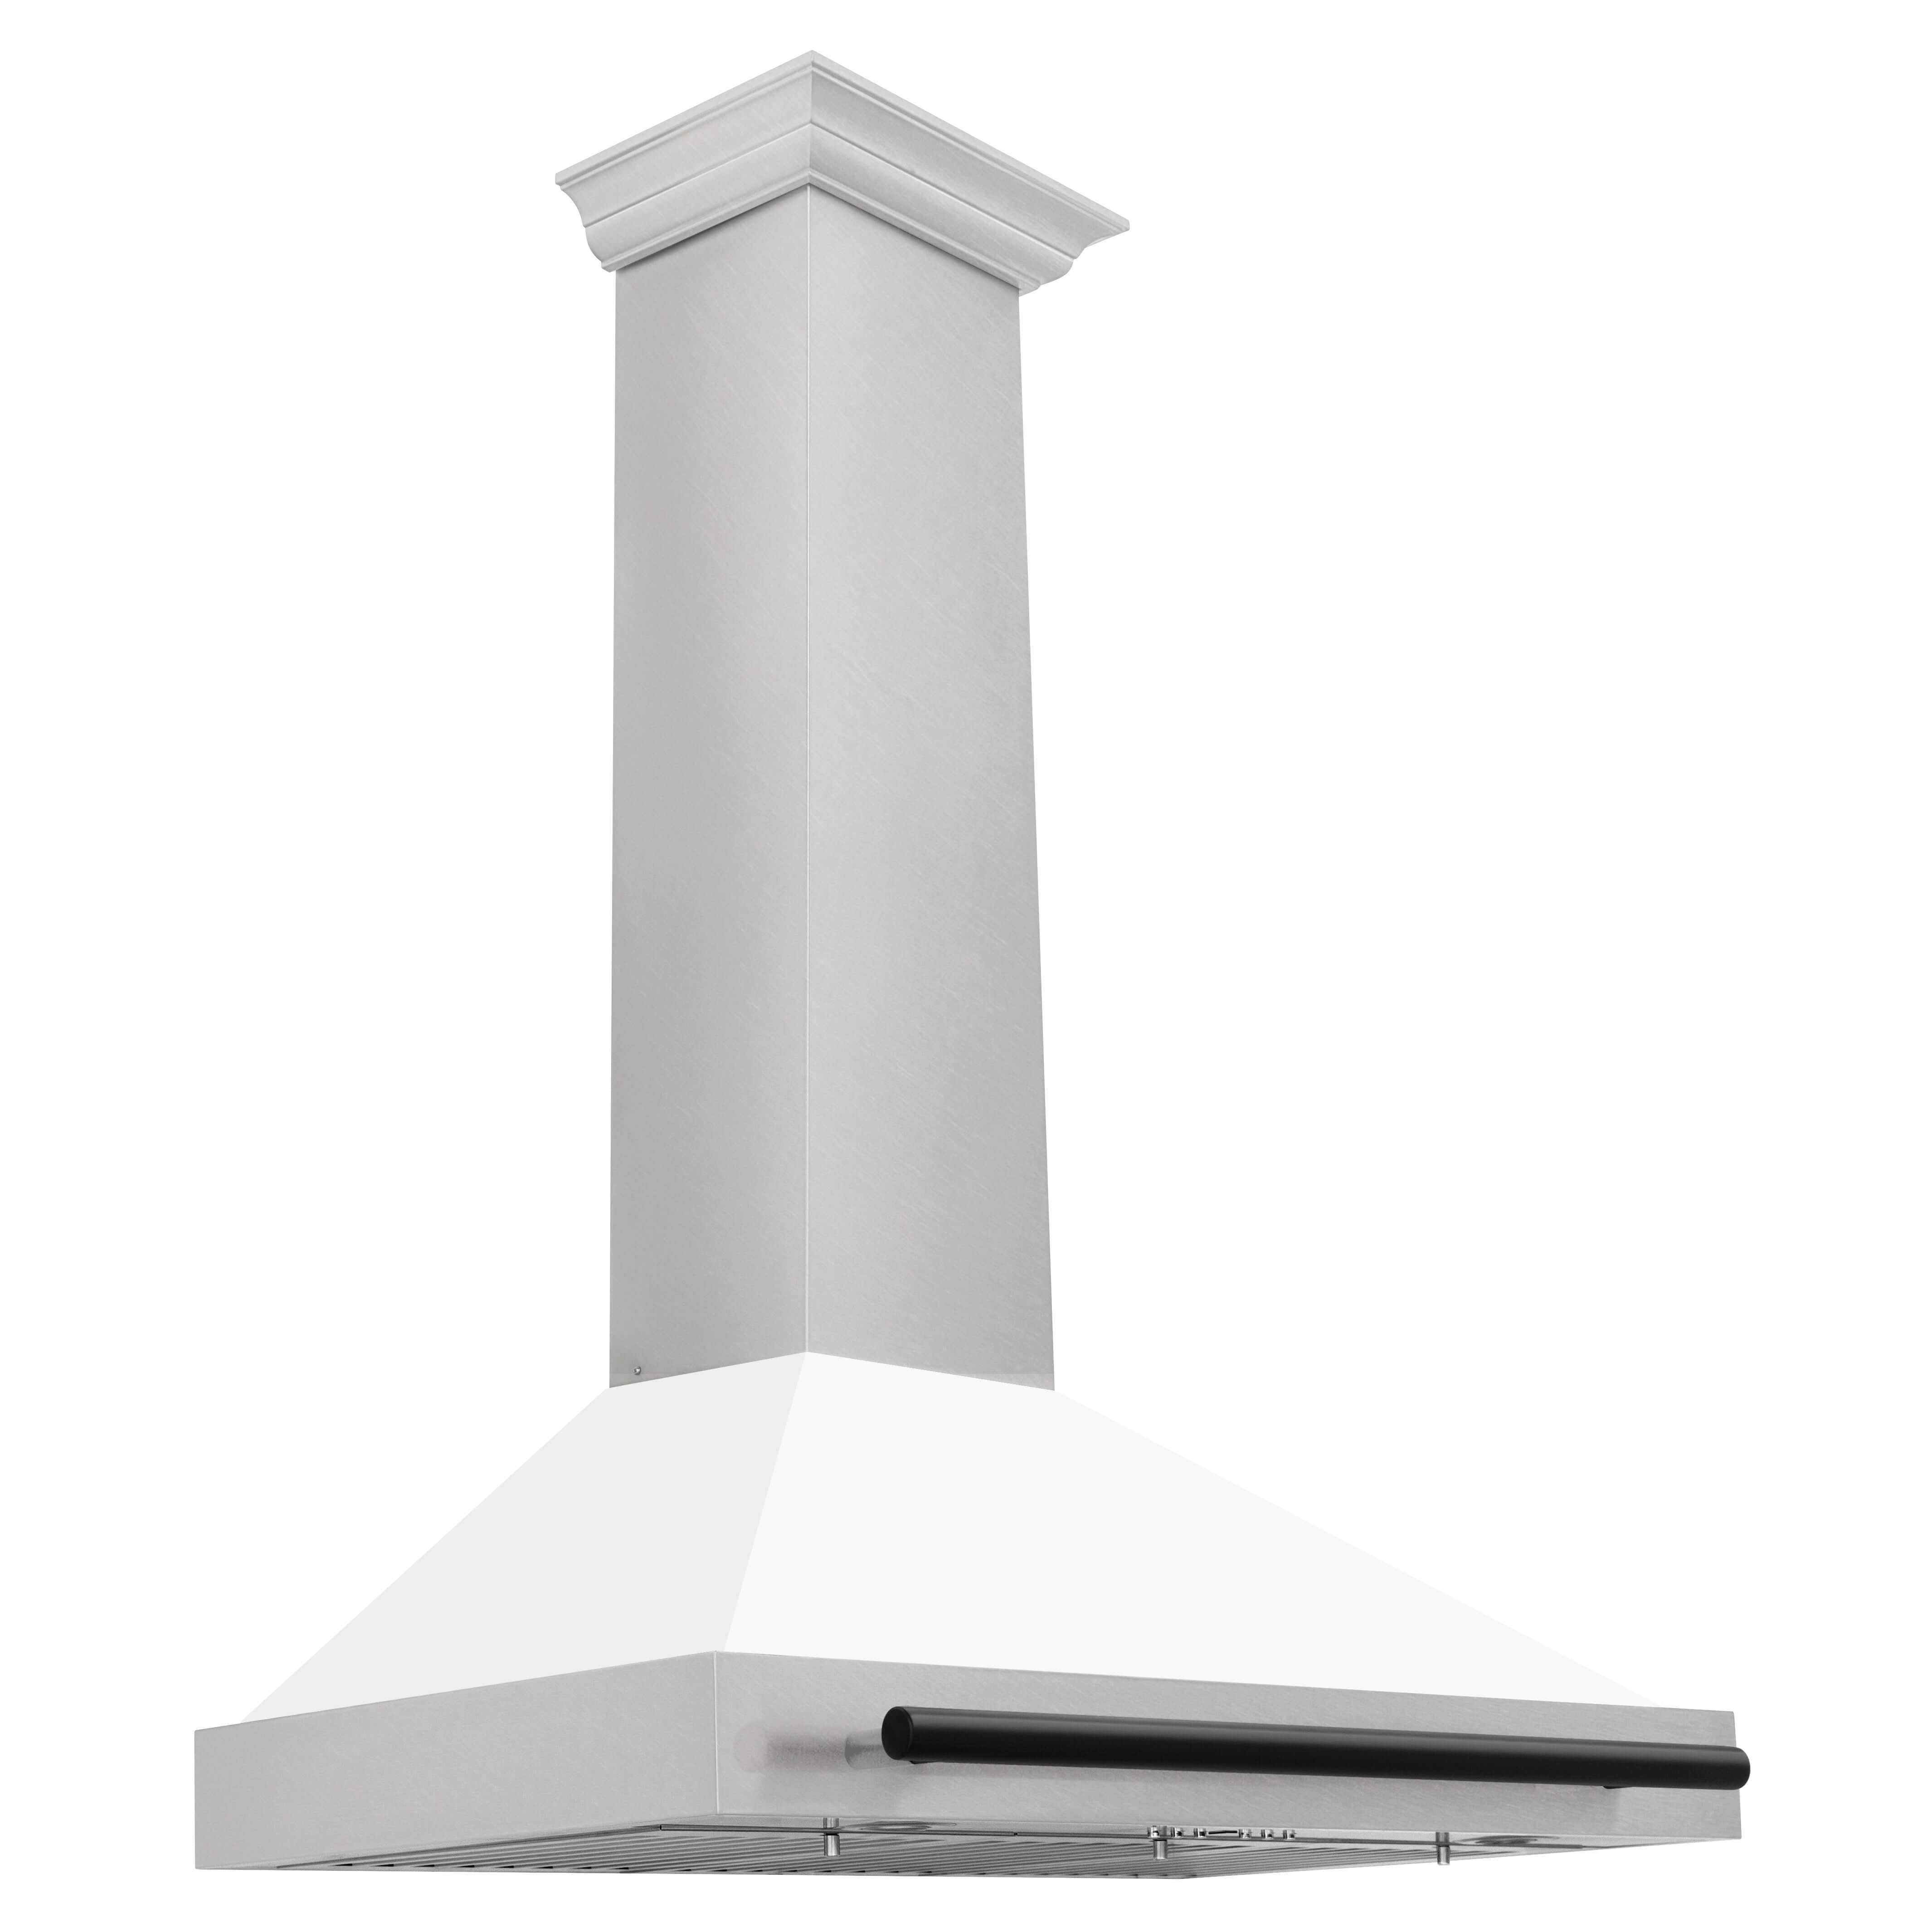 ZLINE Autograph Edition 36 in. Range Hood in Fingerprint Resistant Stainless Steel with White Matte Shell and Accented Handle (KB4SNZ-WM36) DuraSnow Stainless Steel with Matte Black Accents